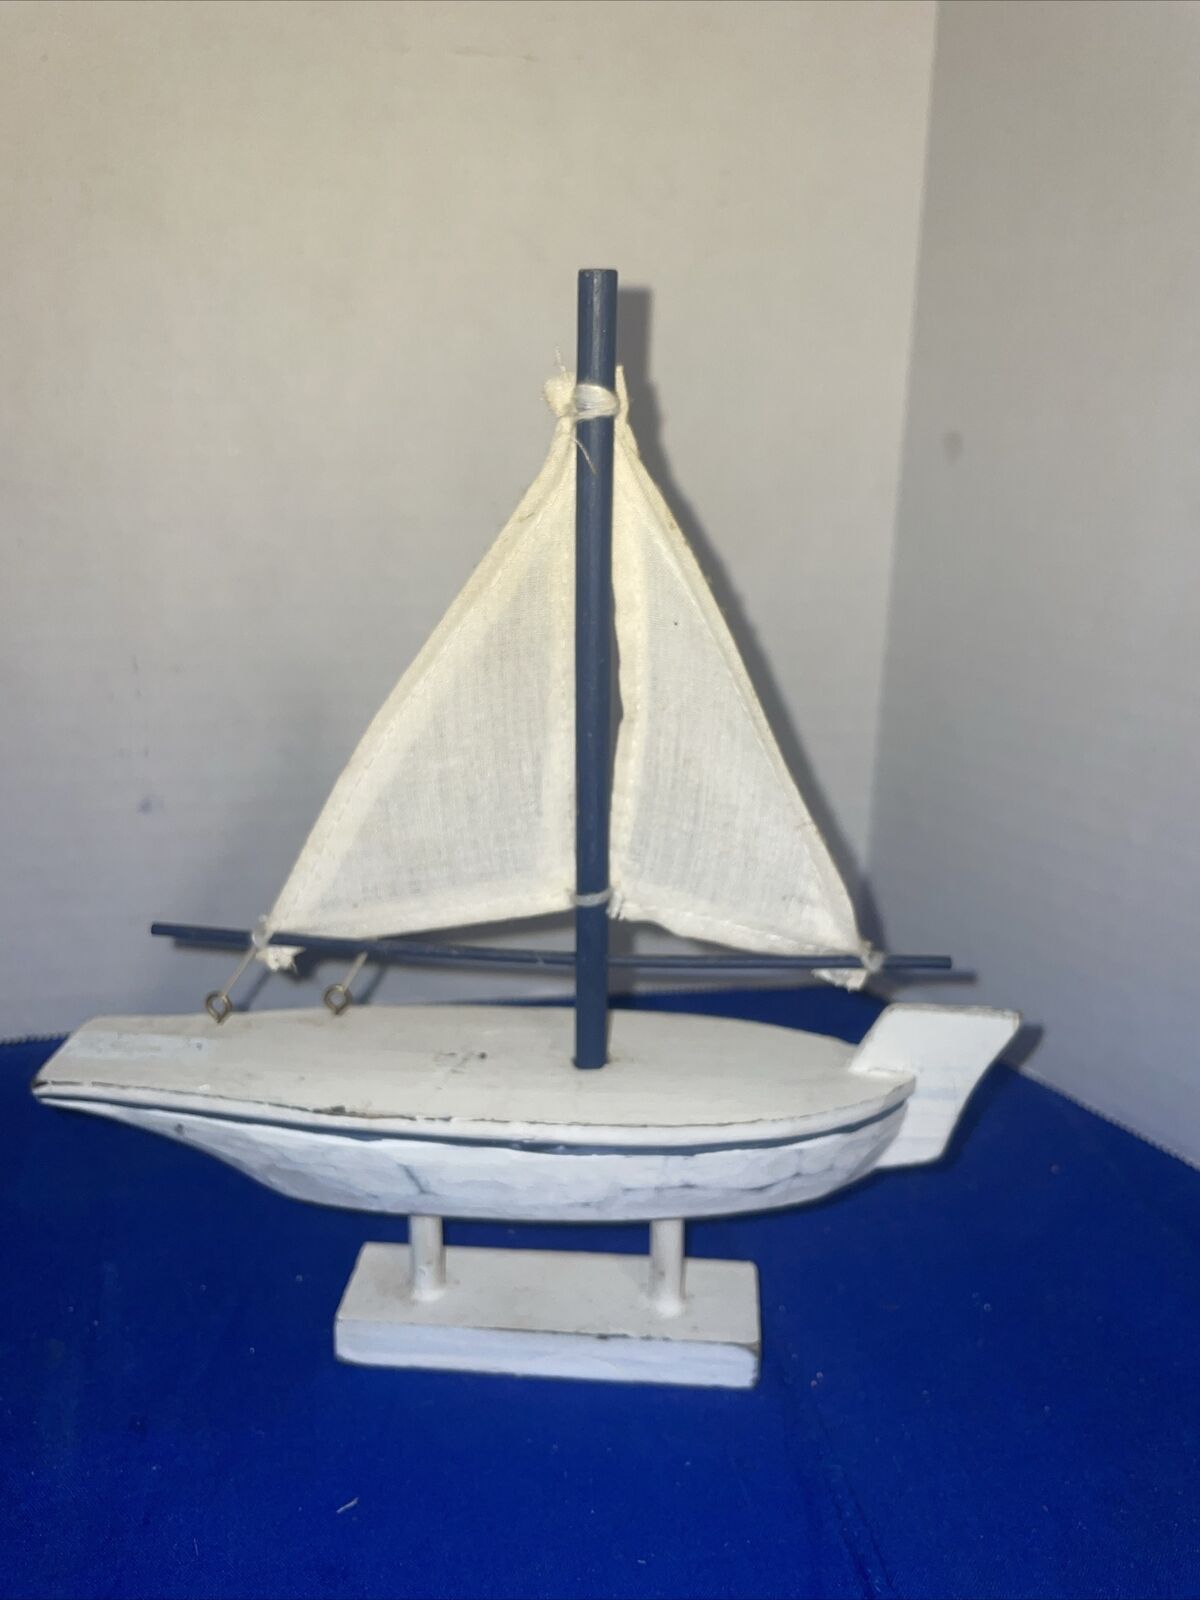 Simple Vintage Wooden Sailboat - 8” Tall X 7.5” Long - Estate Find